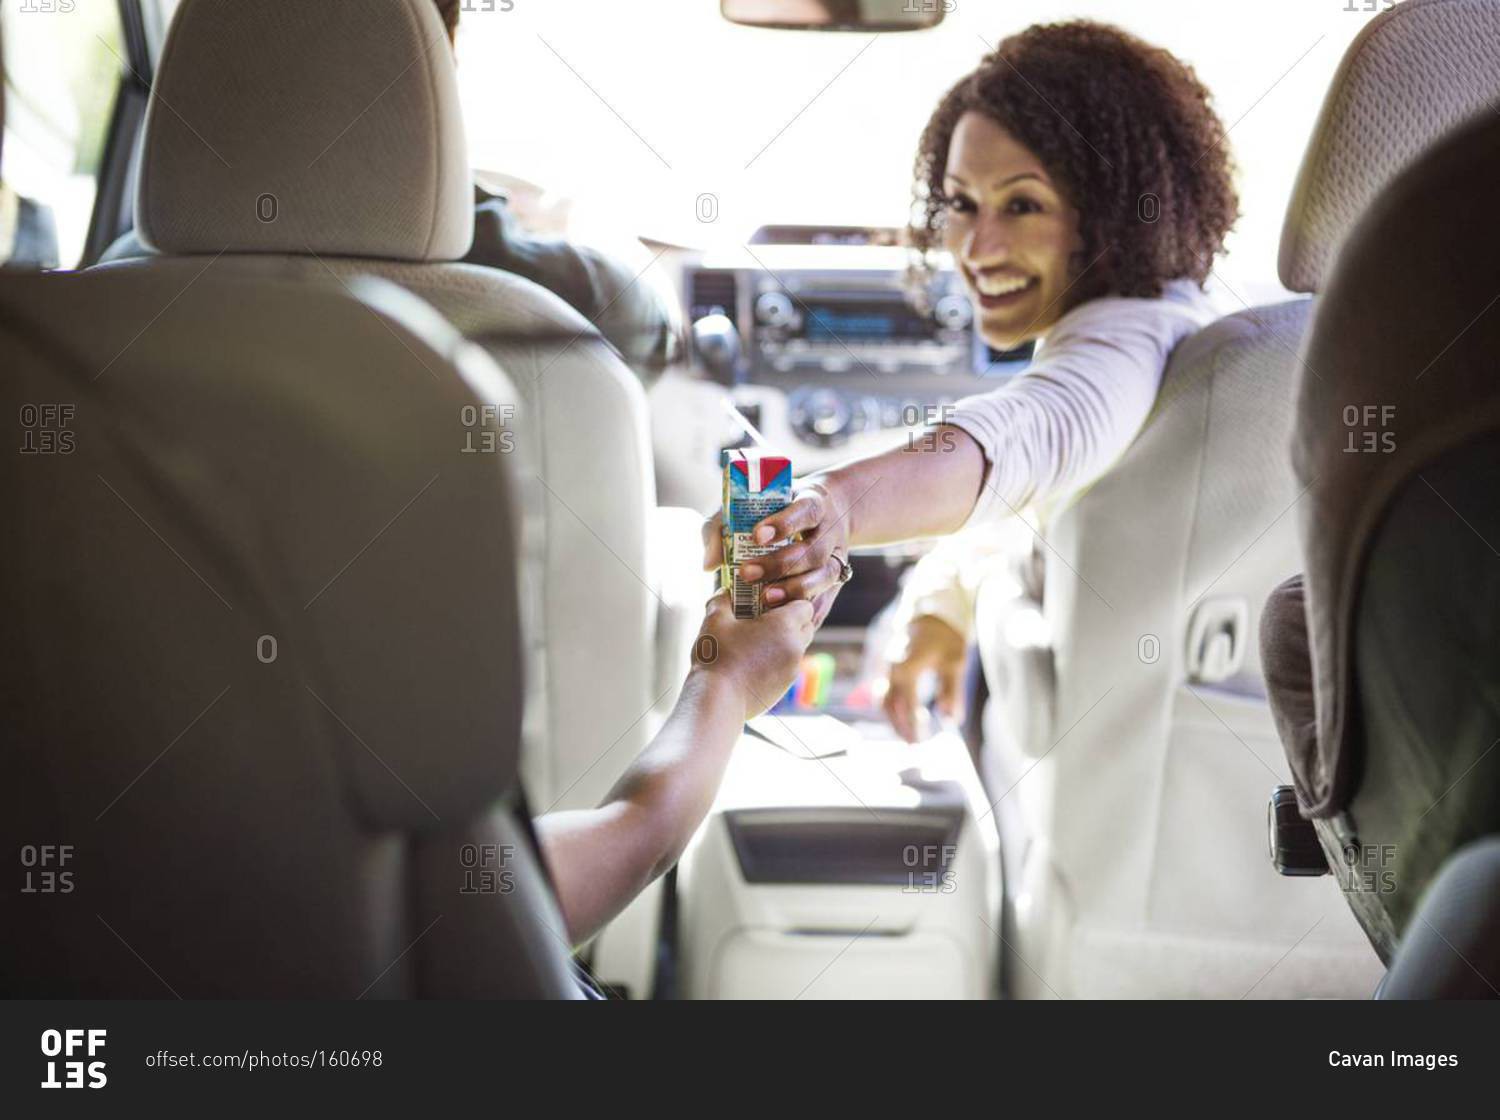 A mom hands her son a juice box in a van